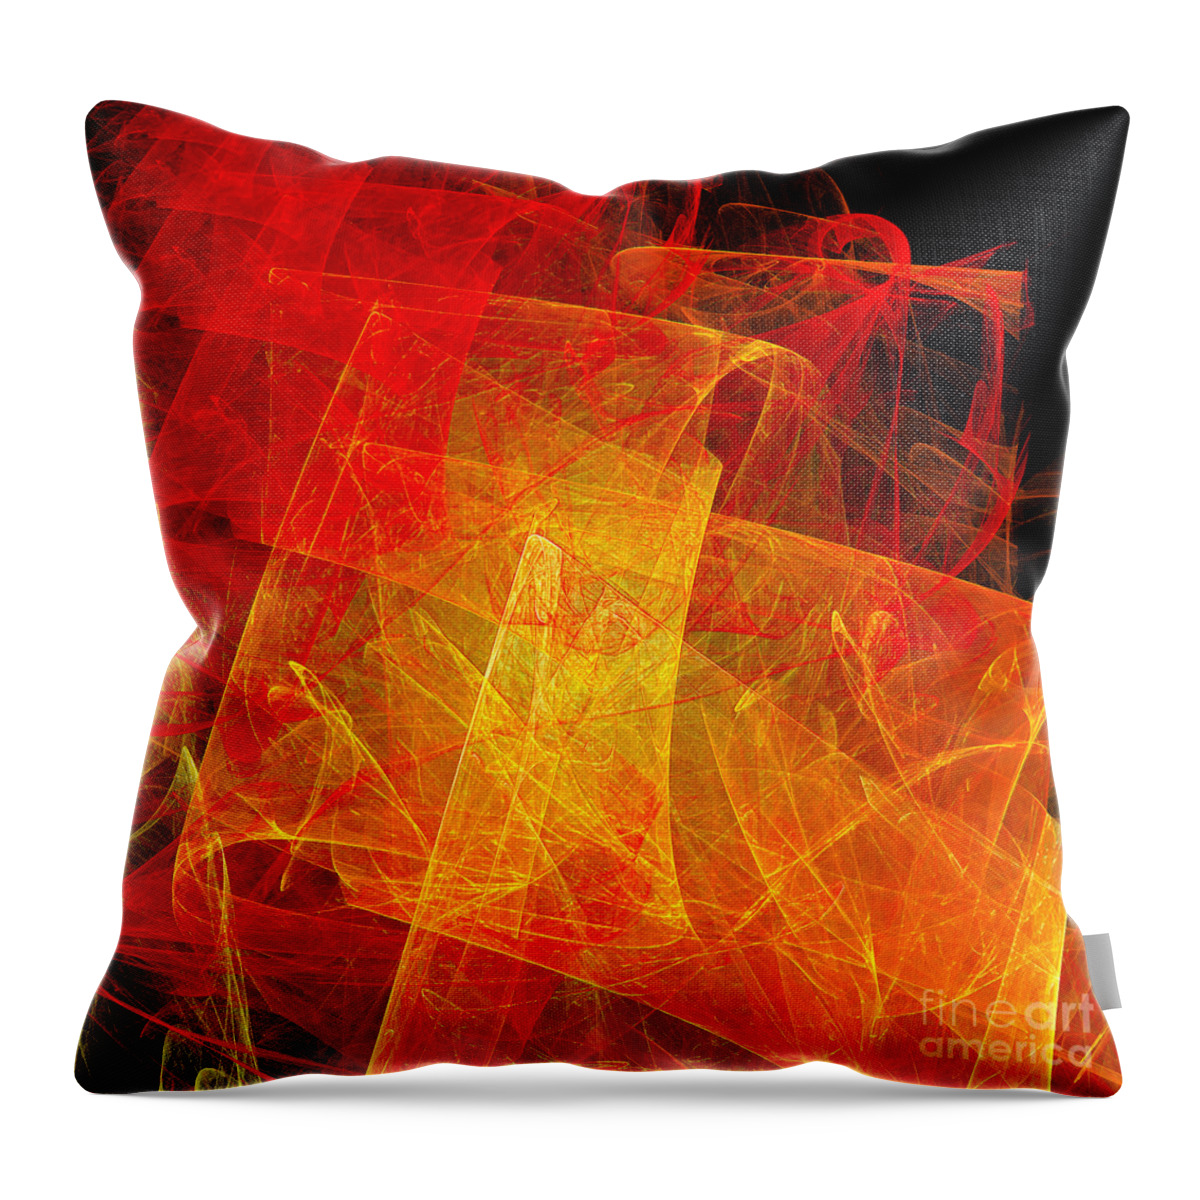 Andee Design Abstract Throw Pillow featuring the digital art Elegance Of The Sun by Andee Design